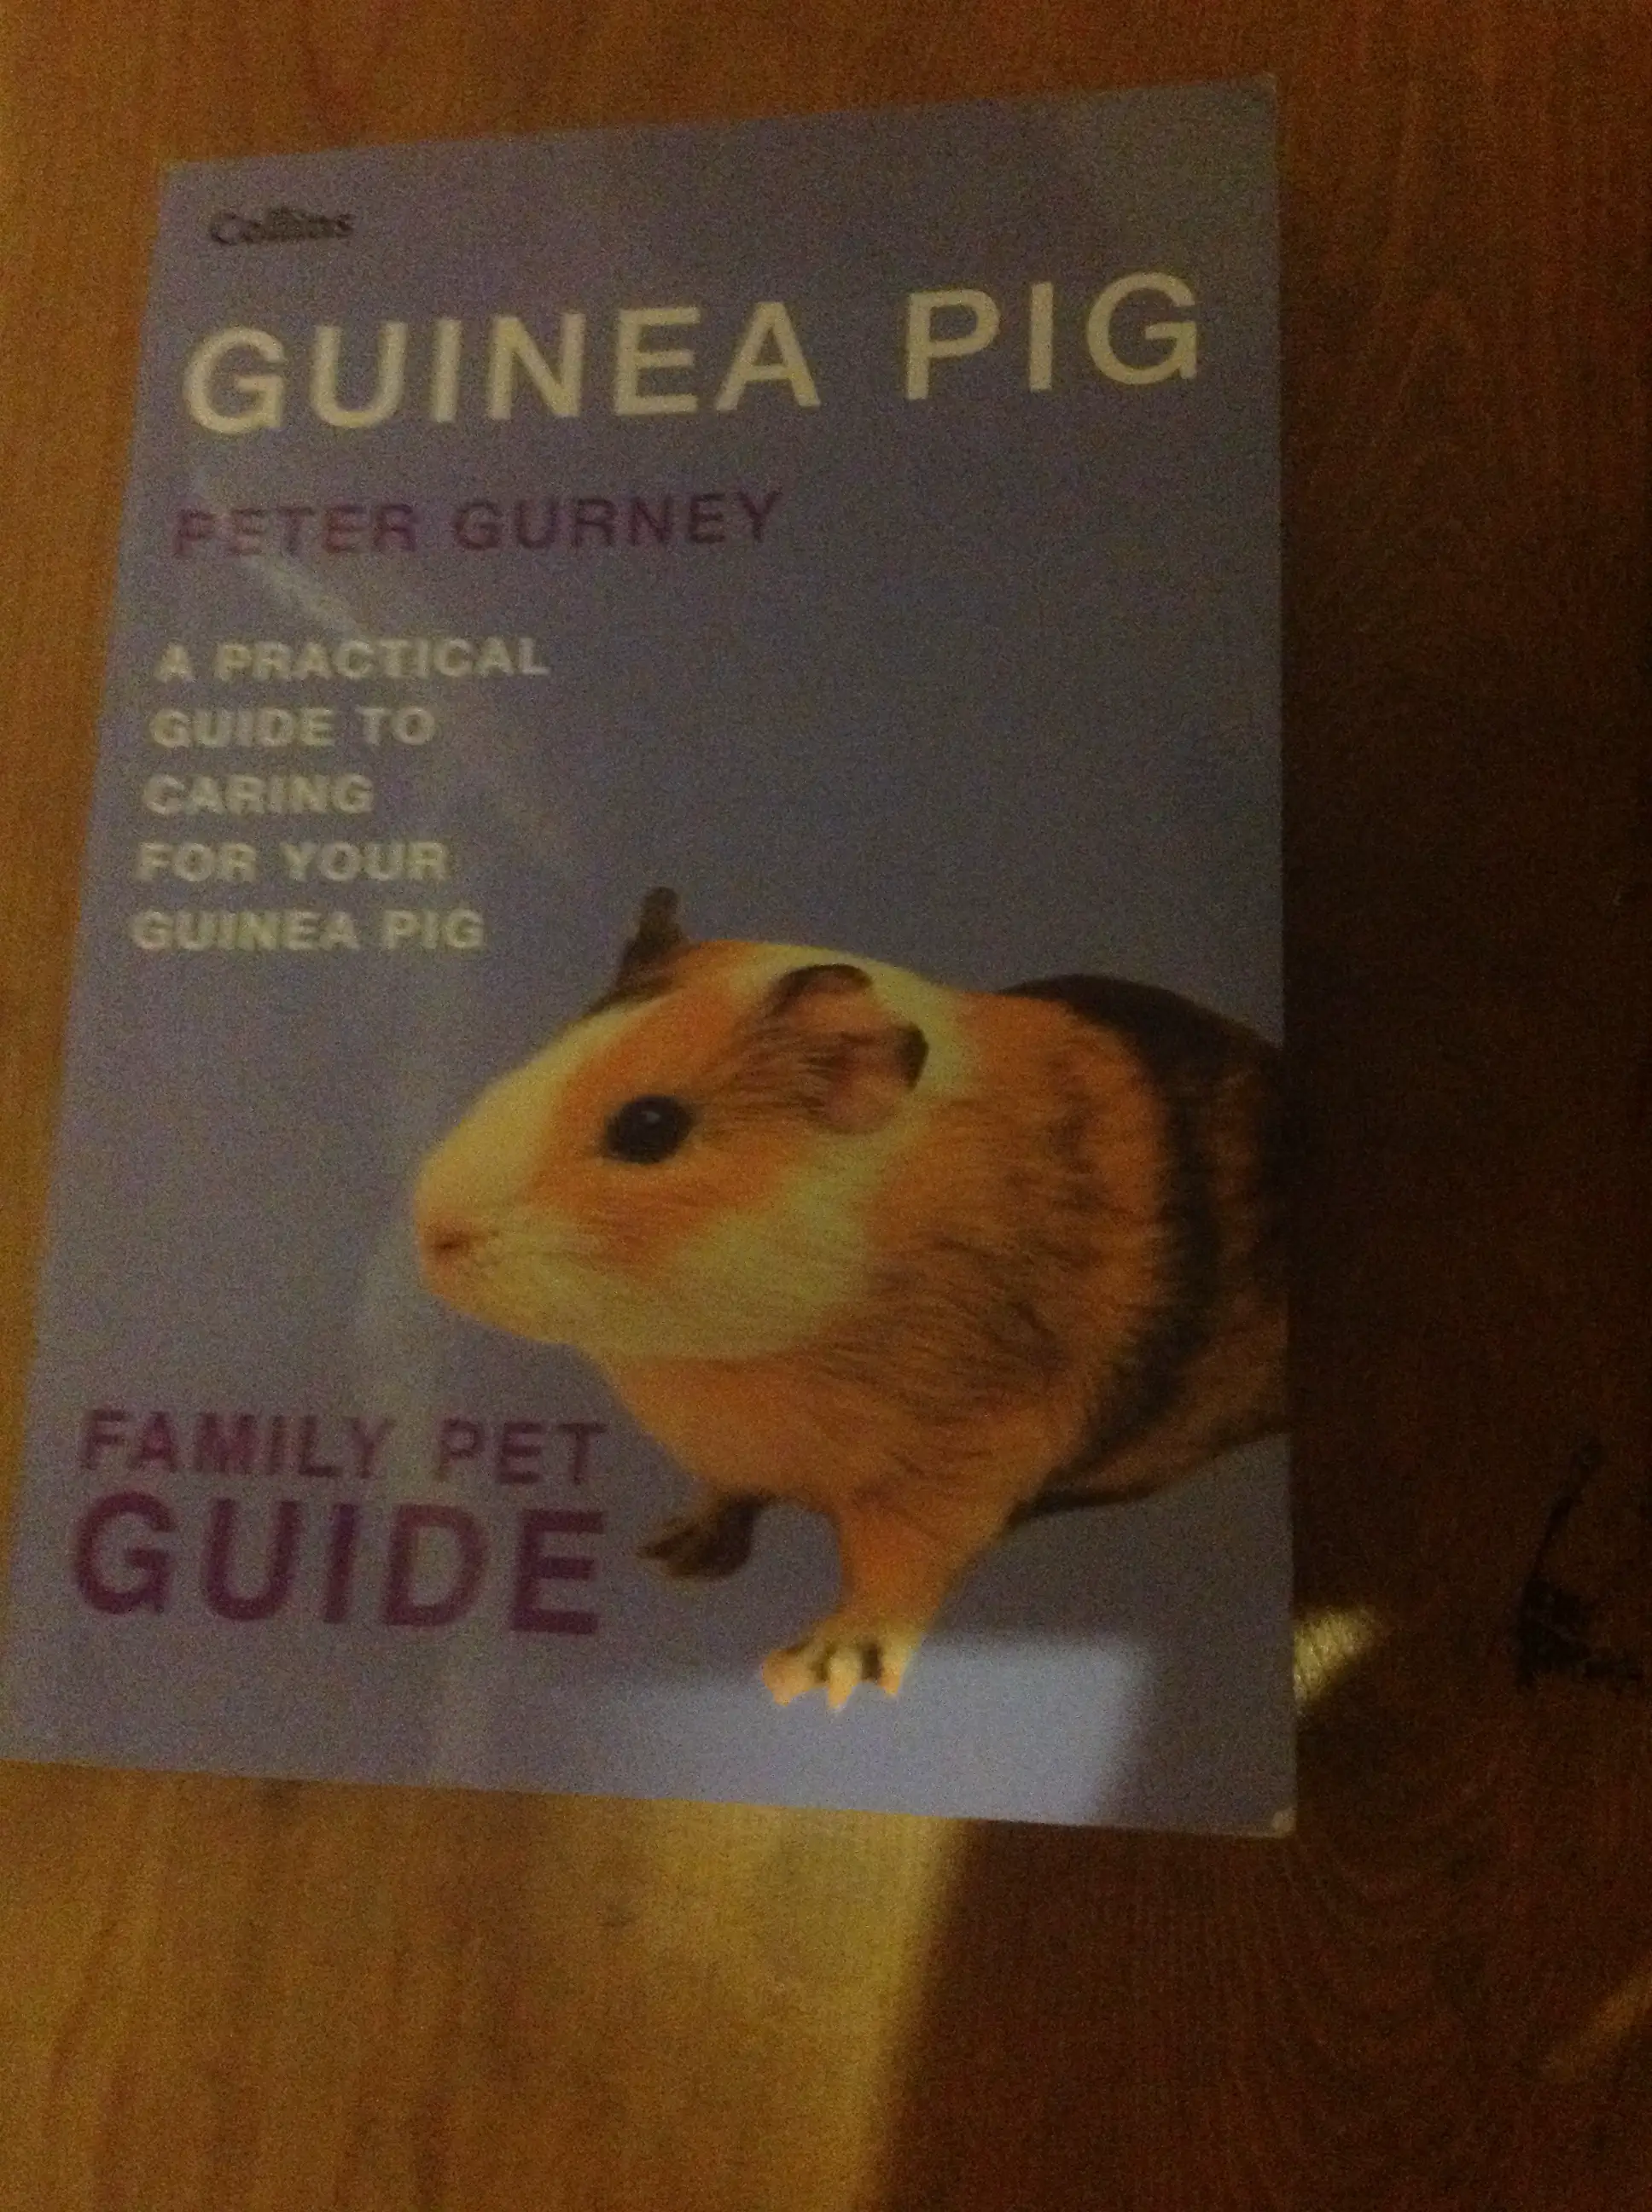 Book Review: Guinea Pig Family Pet Guide by Peter Gurney - Online